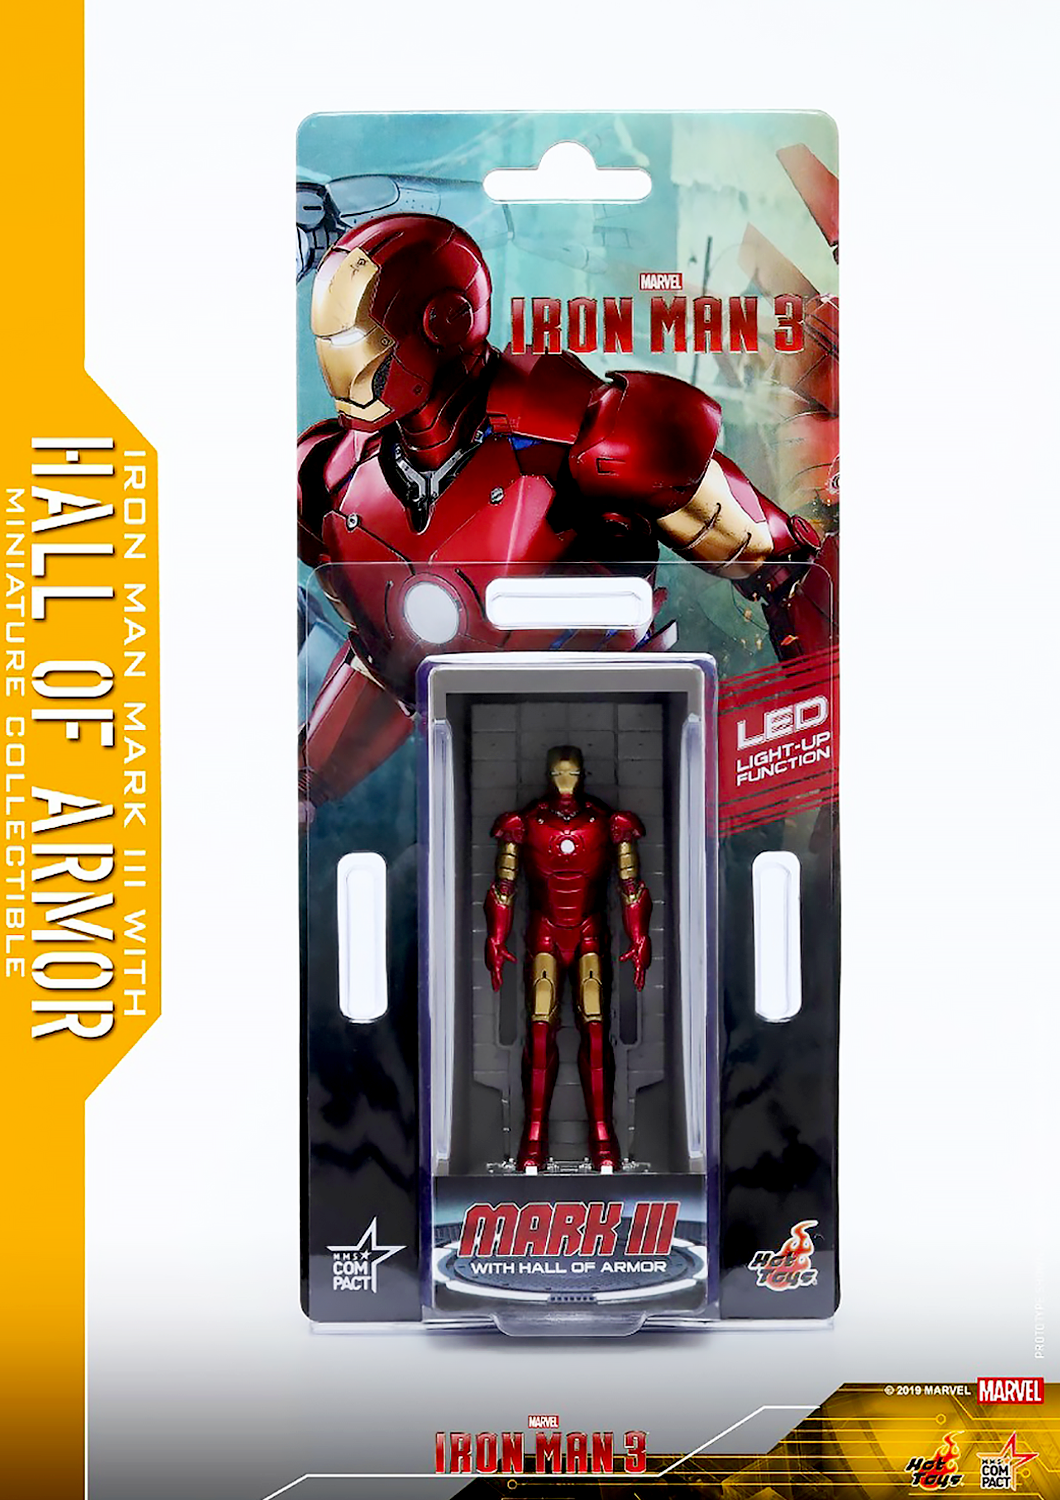 HOT TOYS MARVEL IRON MAN MARK III - MARK 3 WITH HALL OF ARMOR MINIATURE COLLECTIBLE - MMSC007 - Anotoys Collectibles